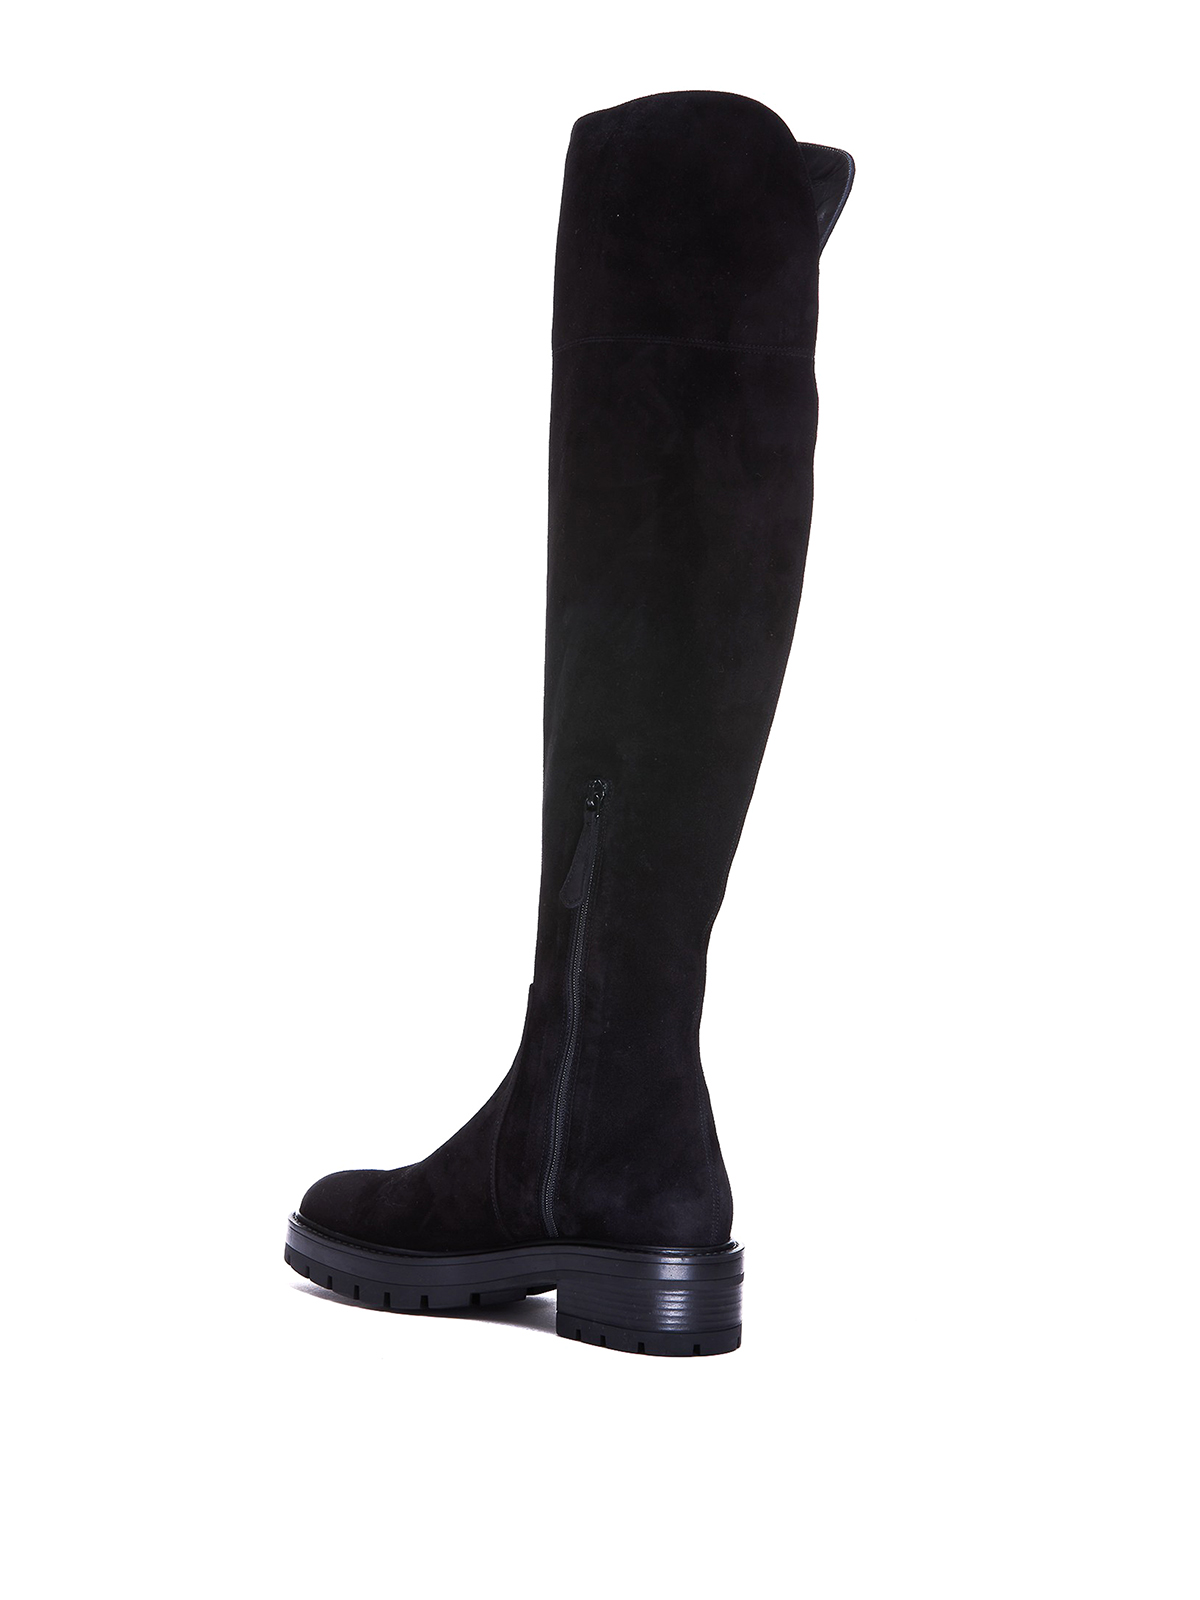 Whitney leather over-the-knee boots